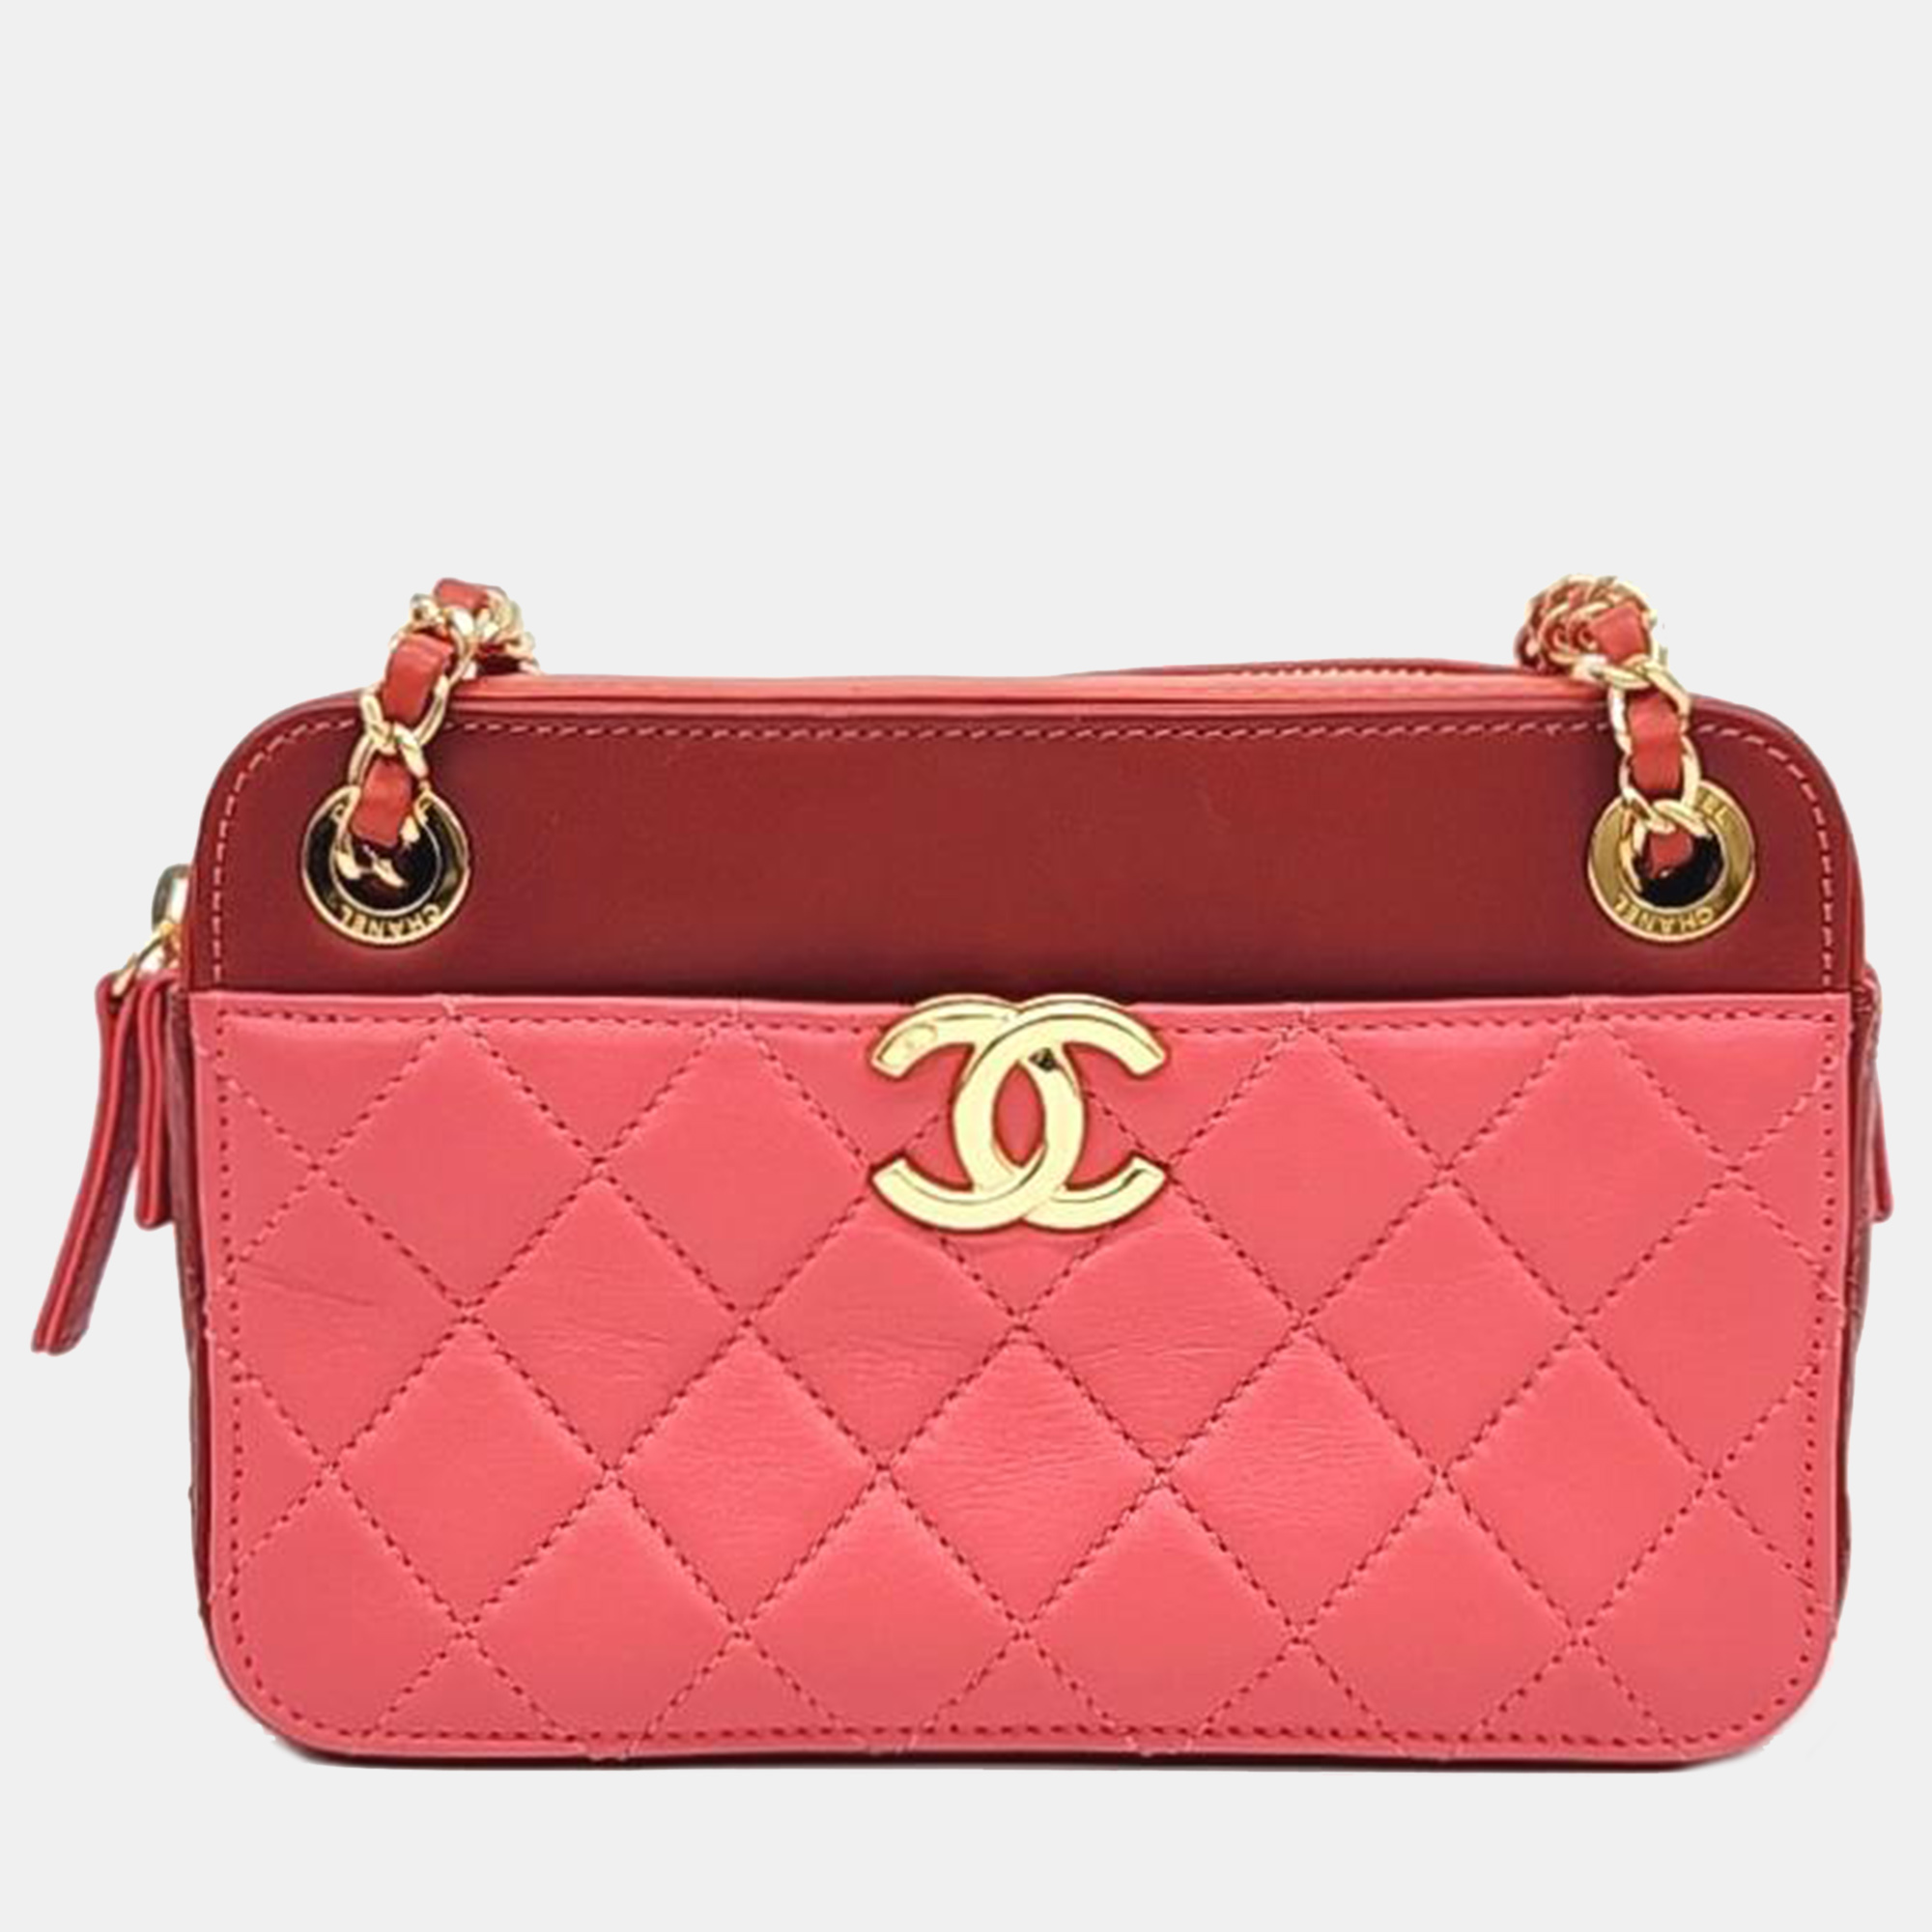 Chanel red leather casual trip camera bag